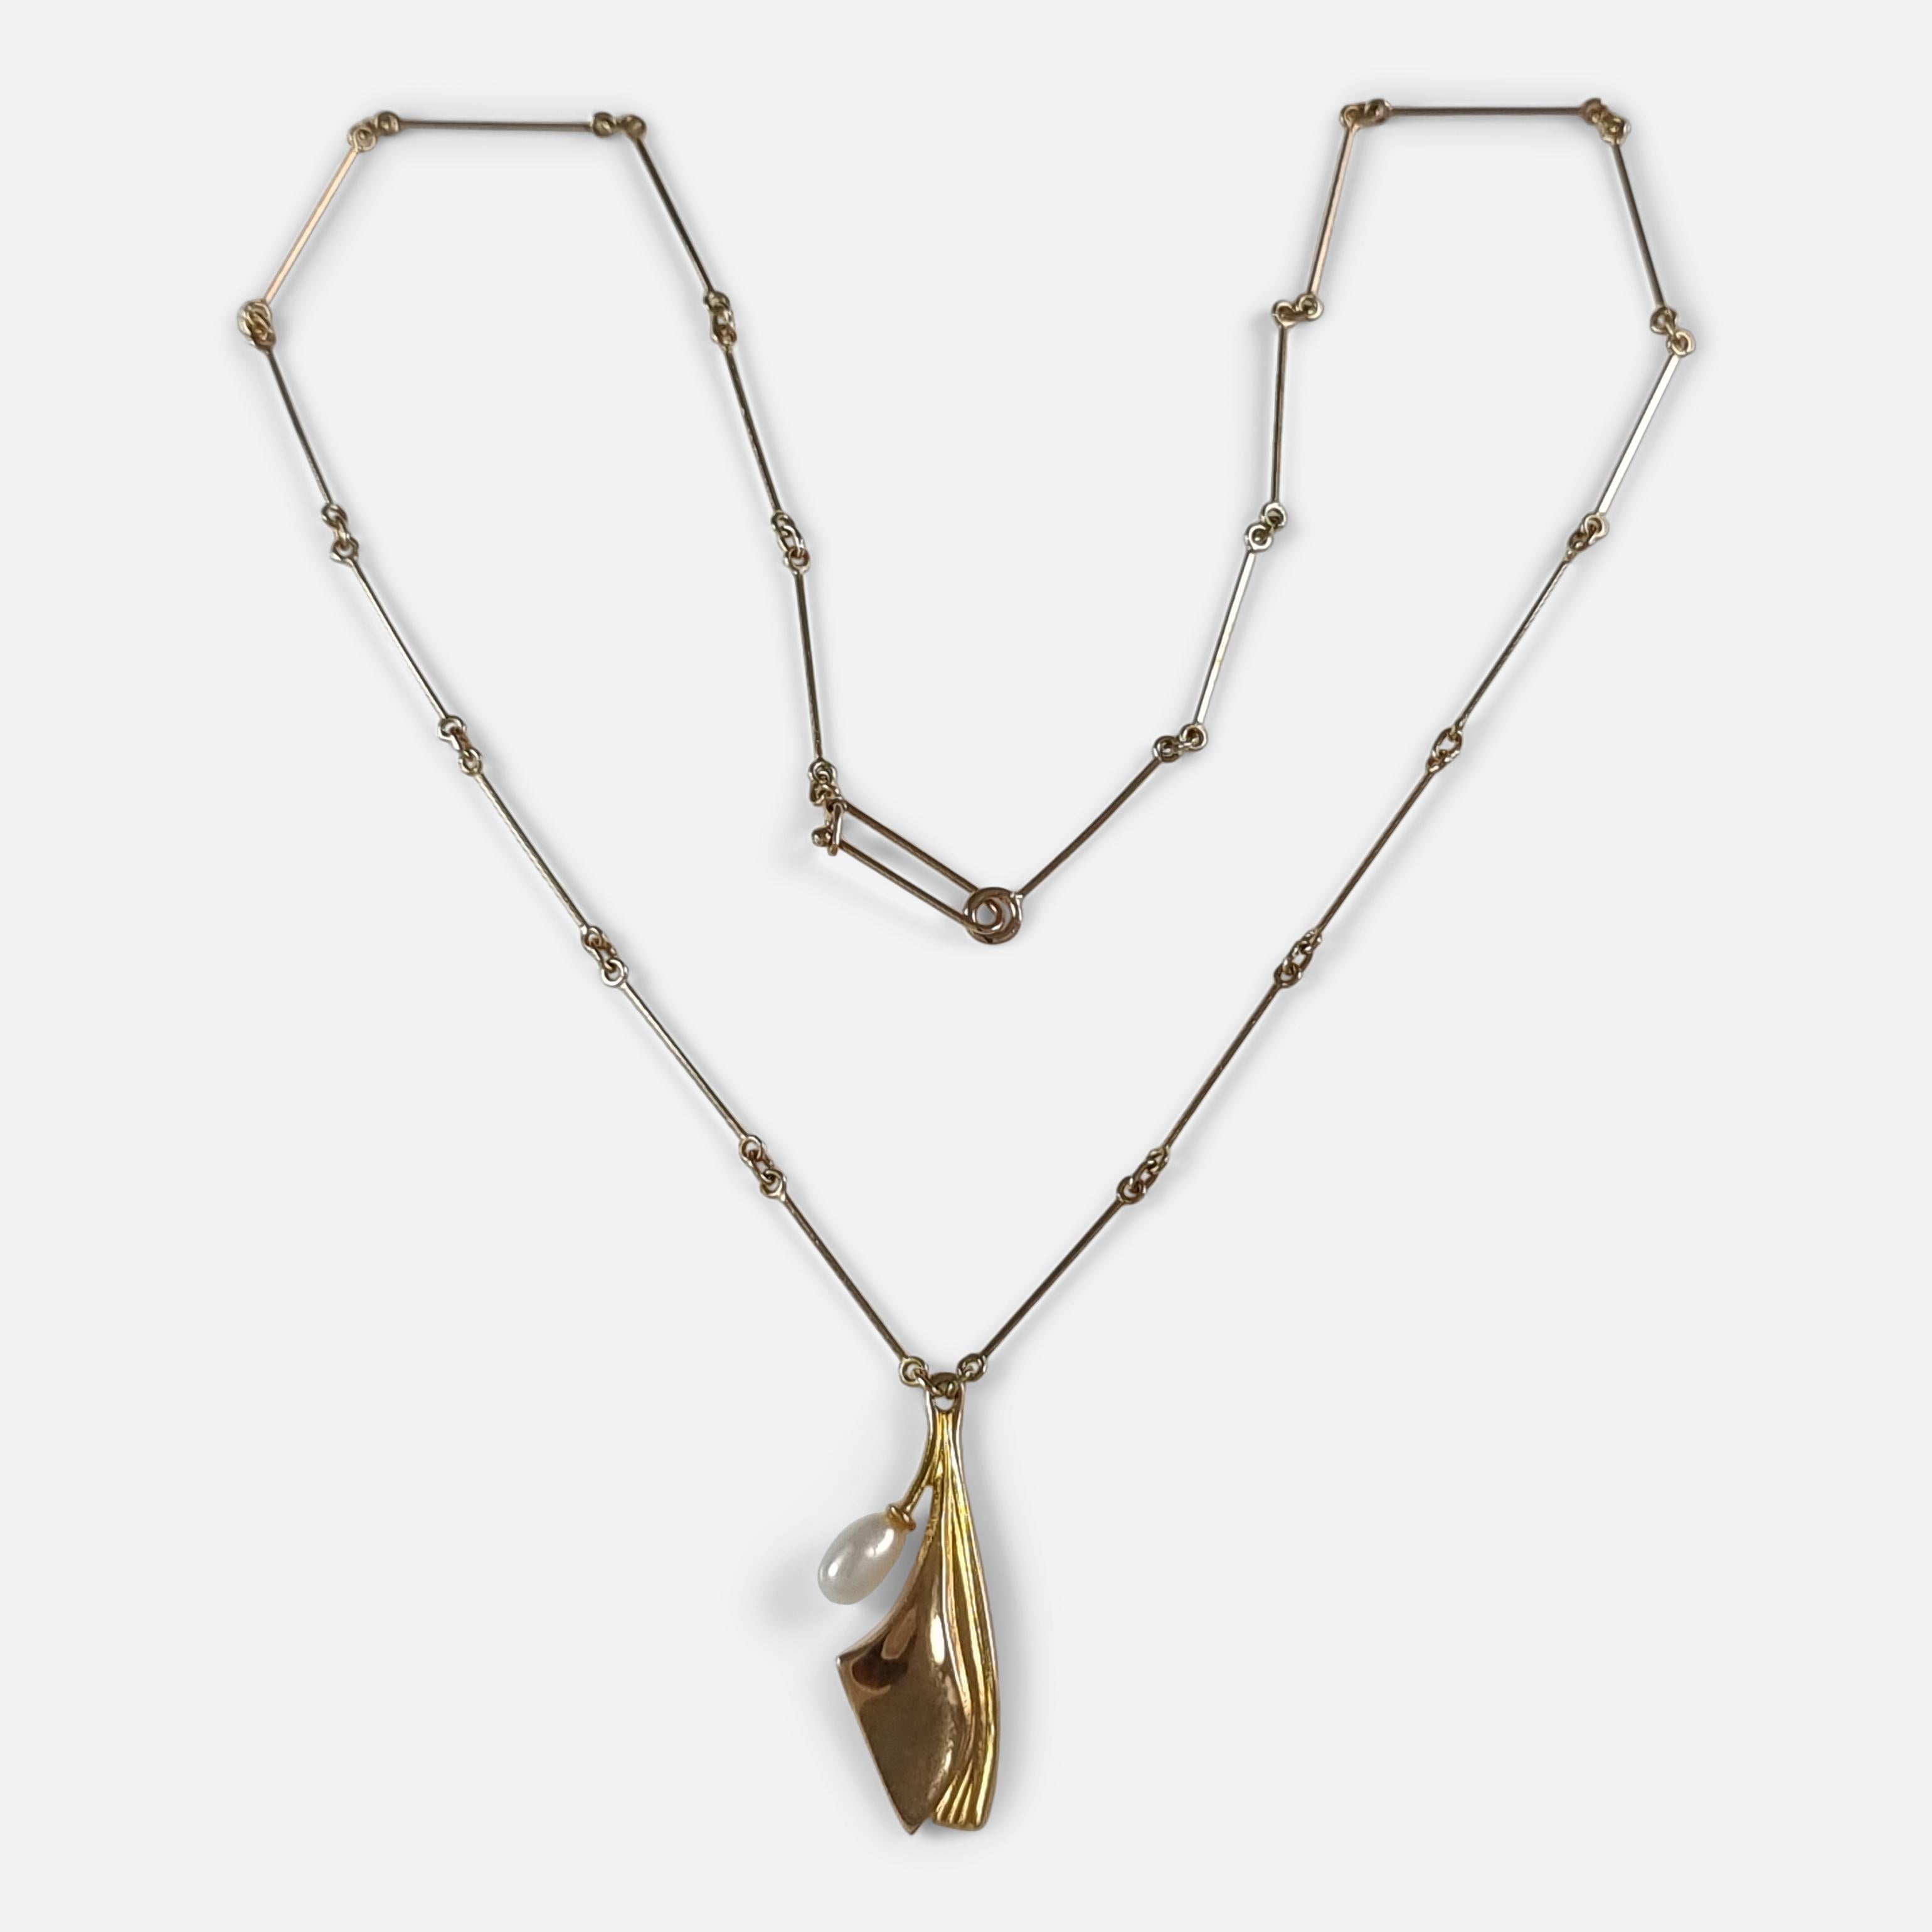 A 14ct yellow gold and pearl pendant necklace by Lapponia.

Hallmarked with the Lapponia makers mark, Common Control Mark '585' to denote 14 carat gold, Finnish nation mark, and date code 'D8' for 1981.

Period: - Late 20th Century.

Maker: -